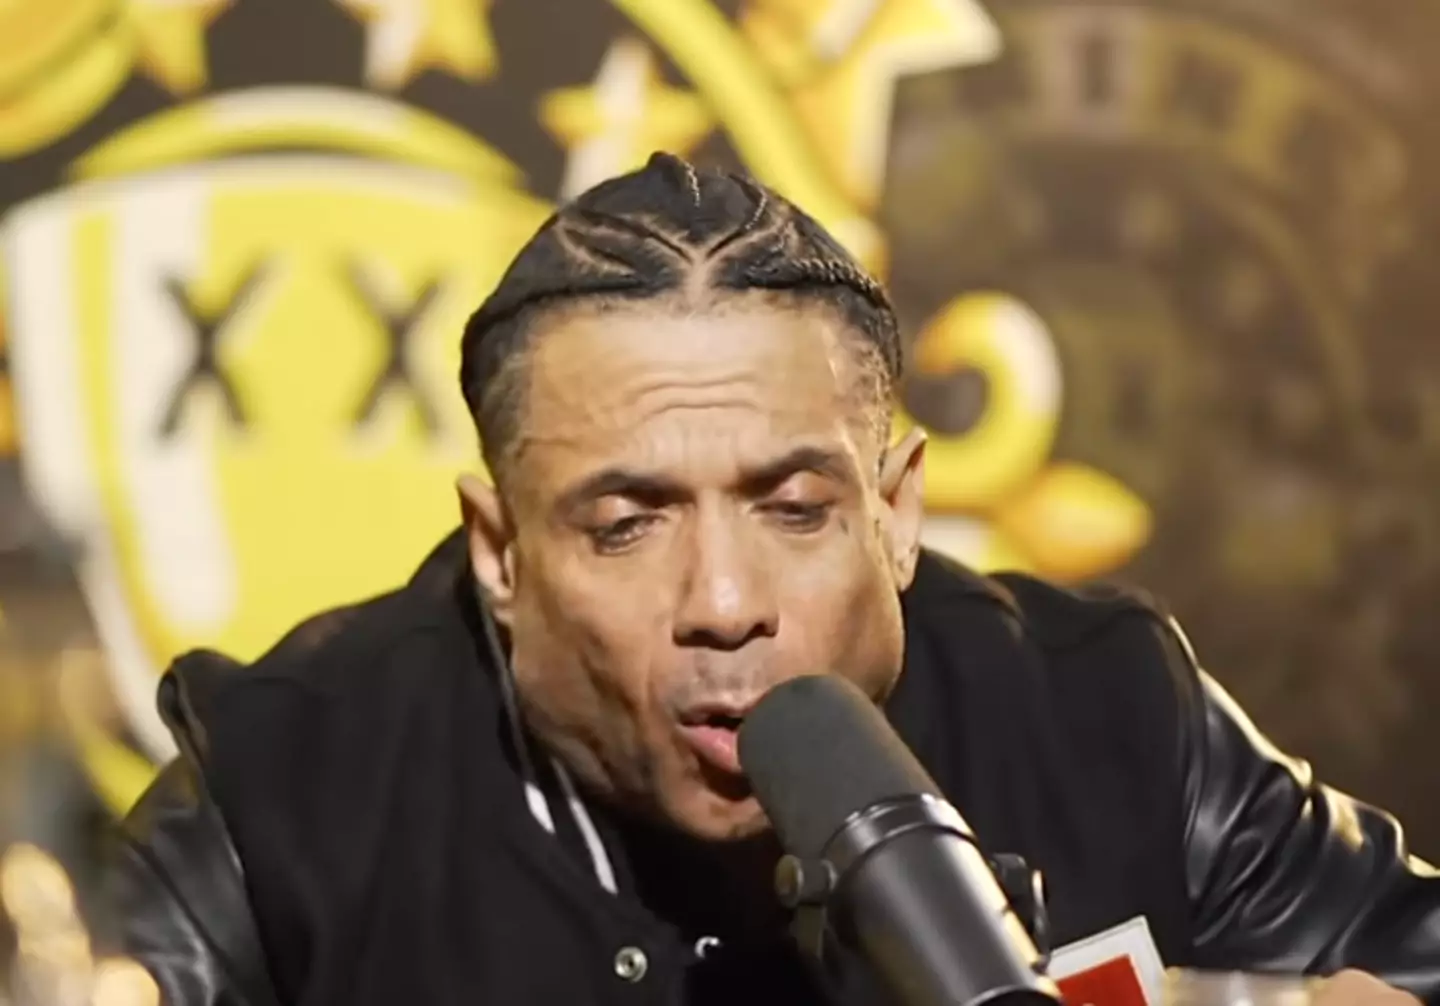 Benzino opened up on an episode of Drink Champs.